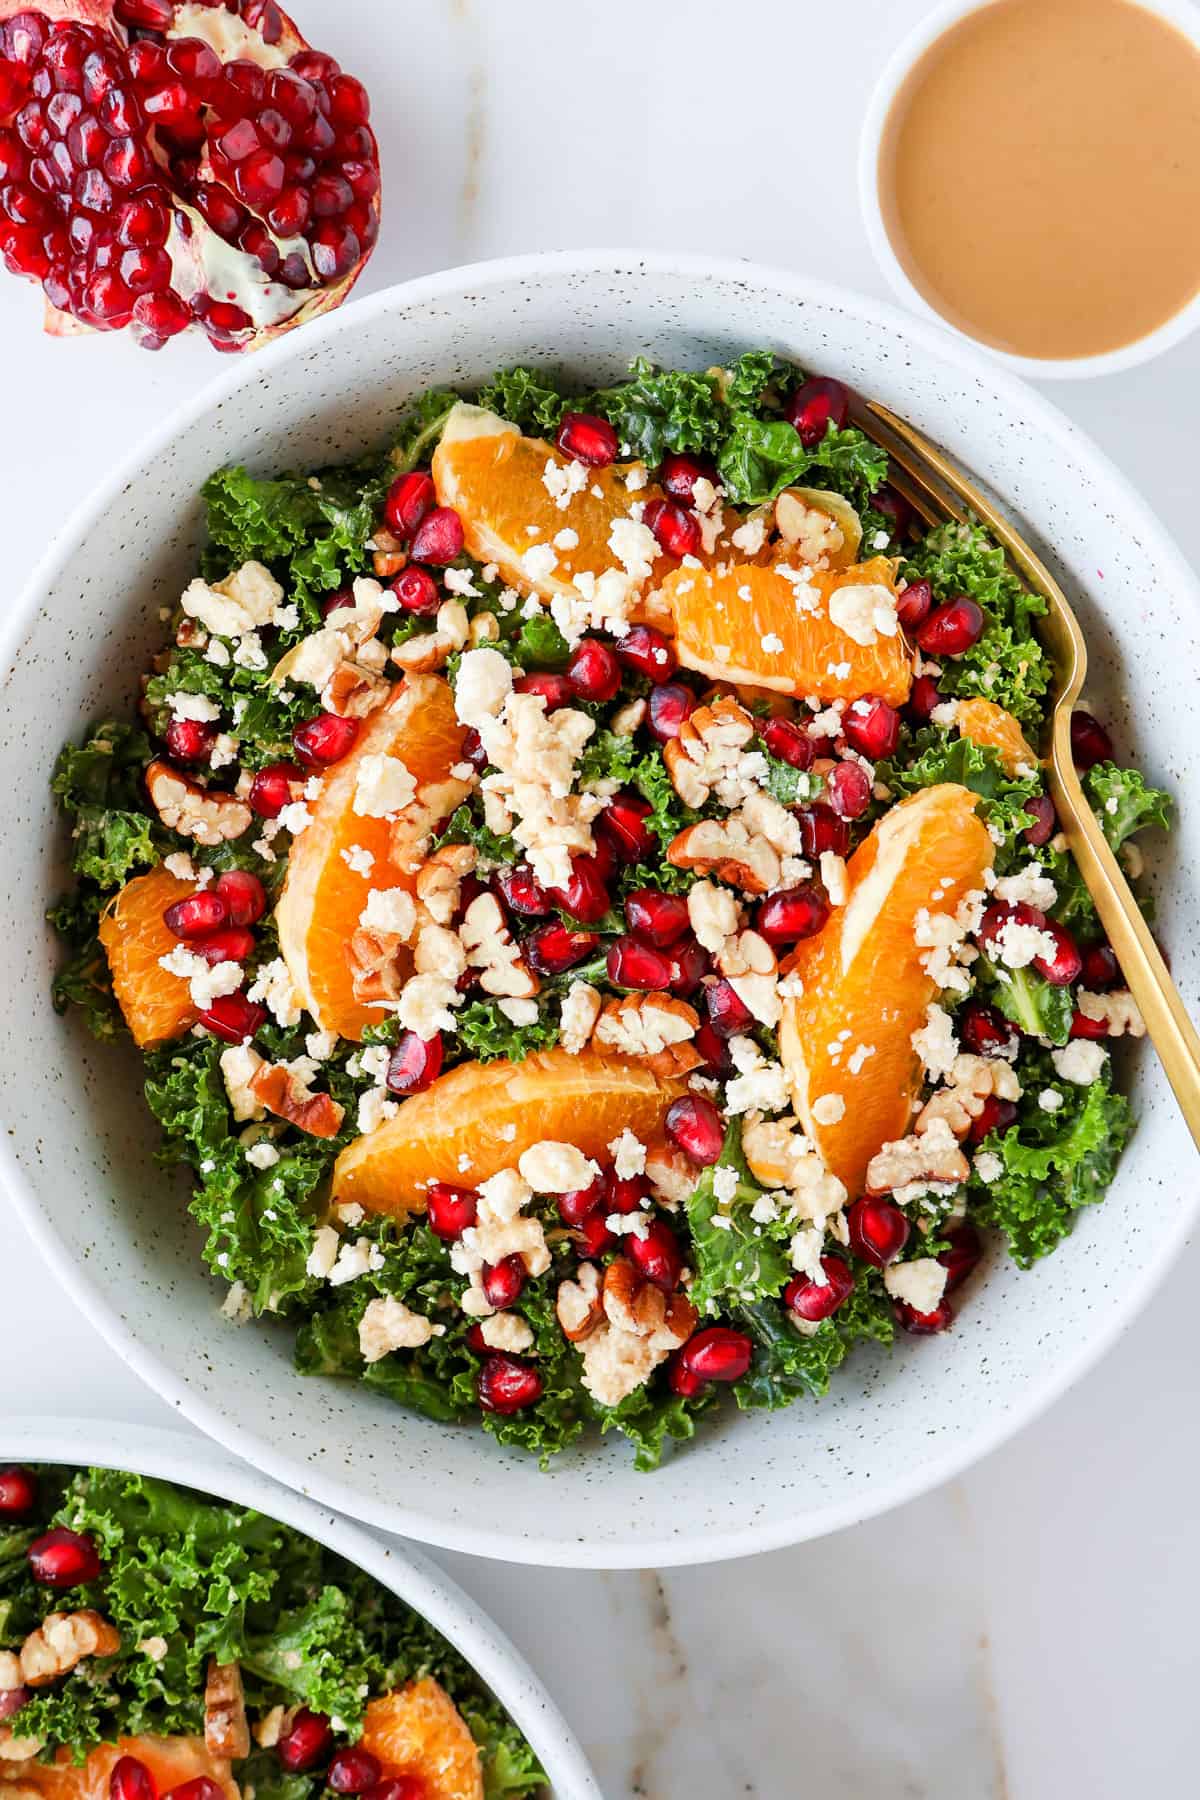 Pomegranate salad in a bowl with a gold fork.